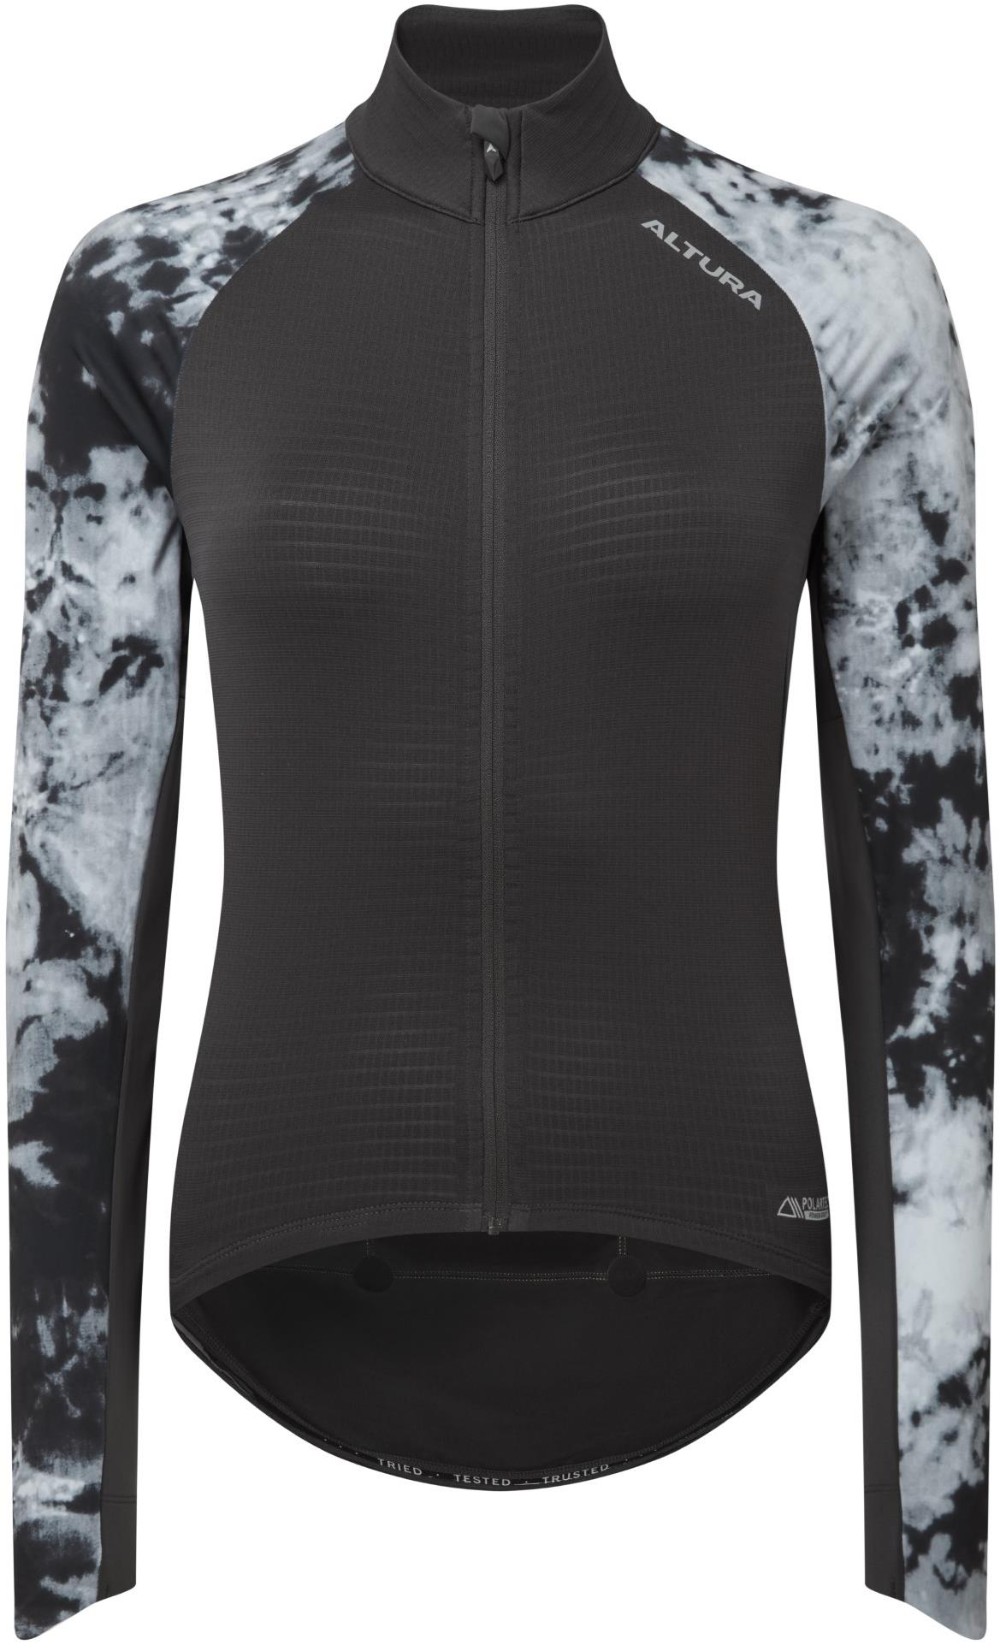 Icon Womens Long Sleeve Jersey image 0